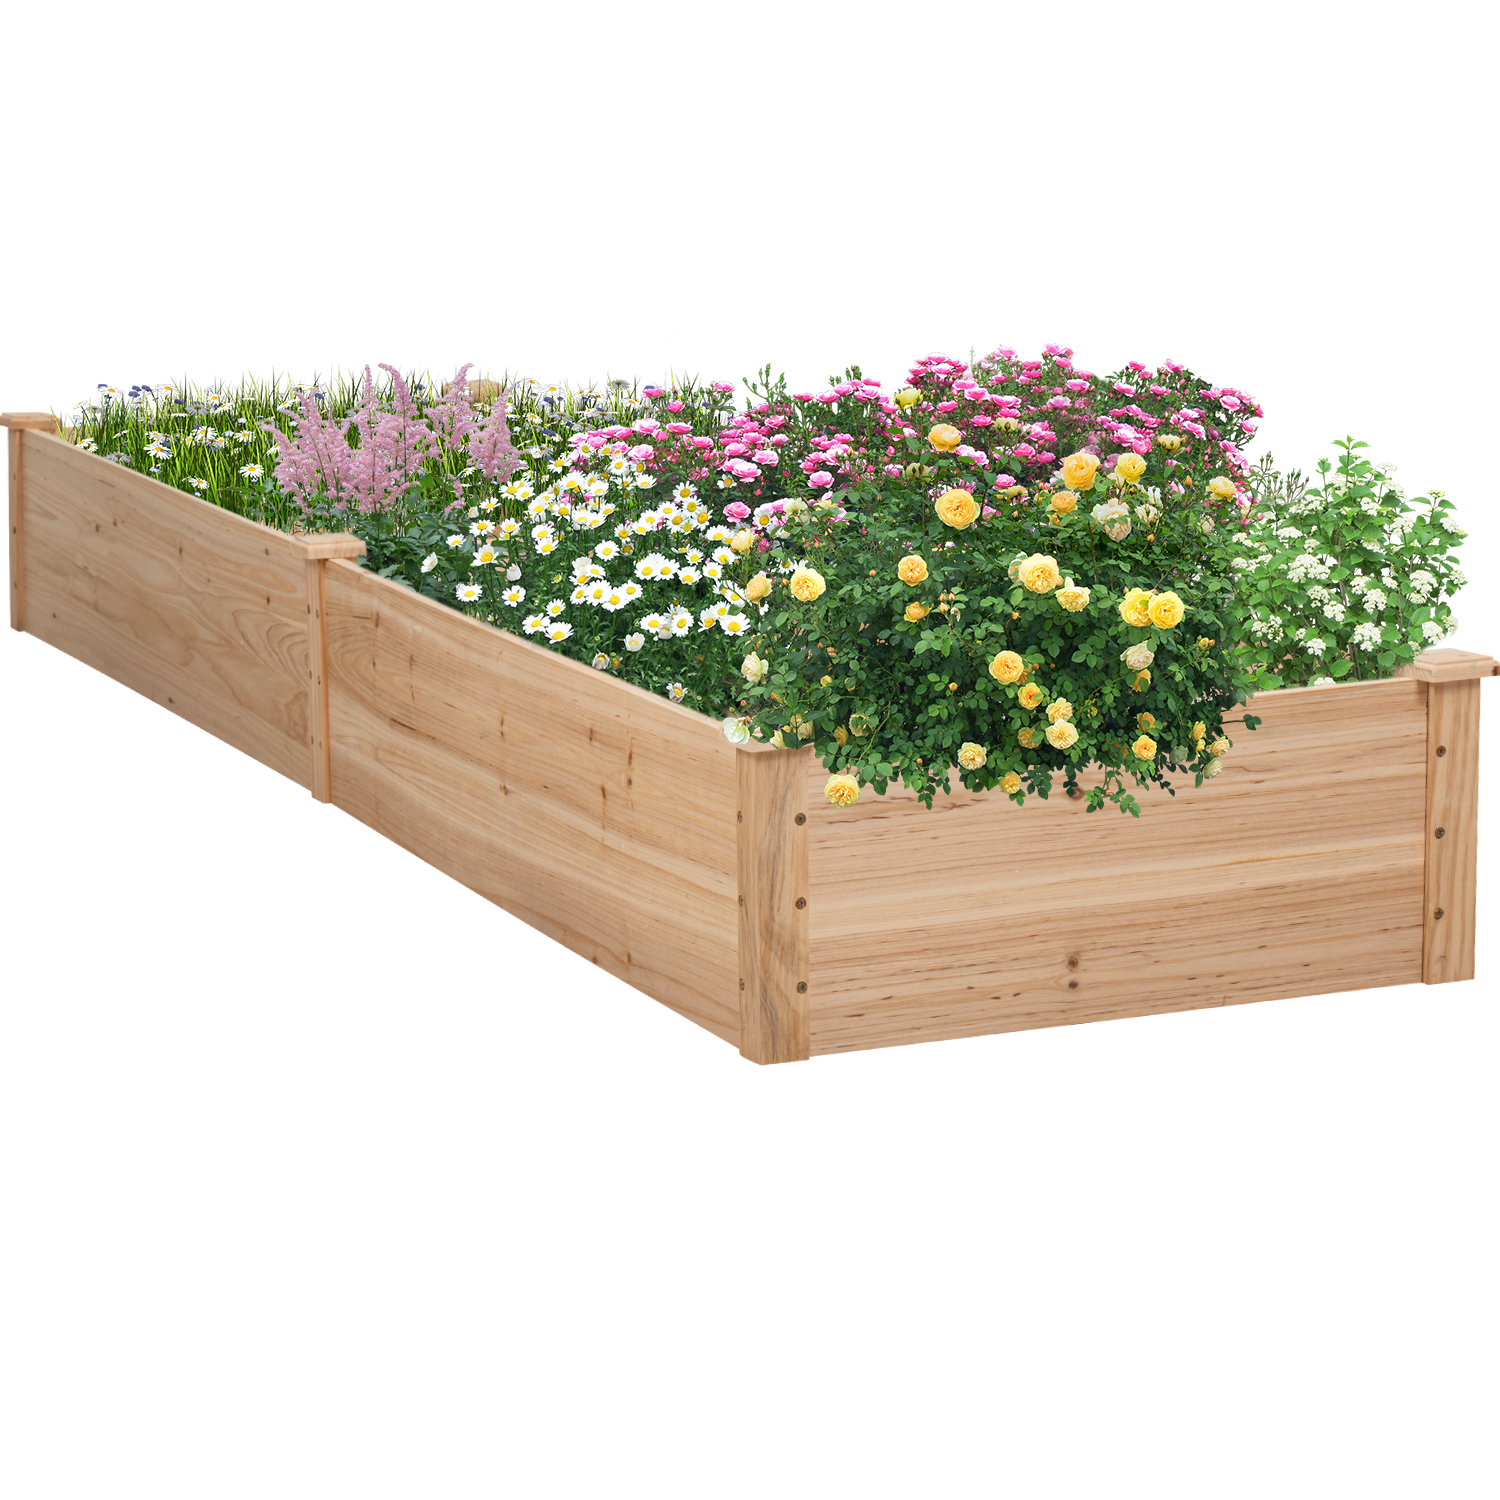 Lacoo Raised Garden Bed 92x22x9in Divisible Wooden Planter Box Outdoor Patio Elevated Garden Box Kit to Grow Flower, Fruits, Herbs and Vegetables for Backyard, Patio, Balcony - Natural - image 1 of 9